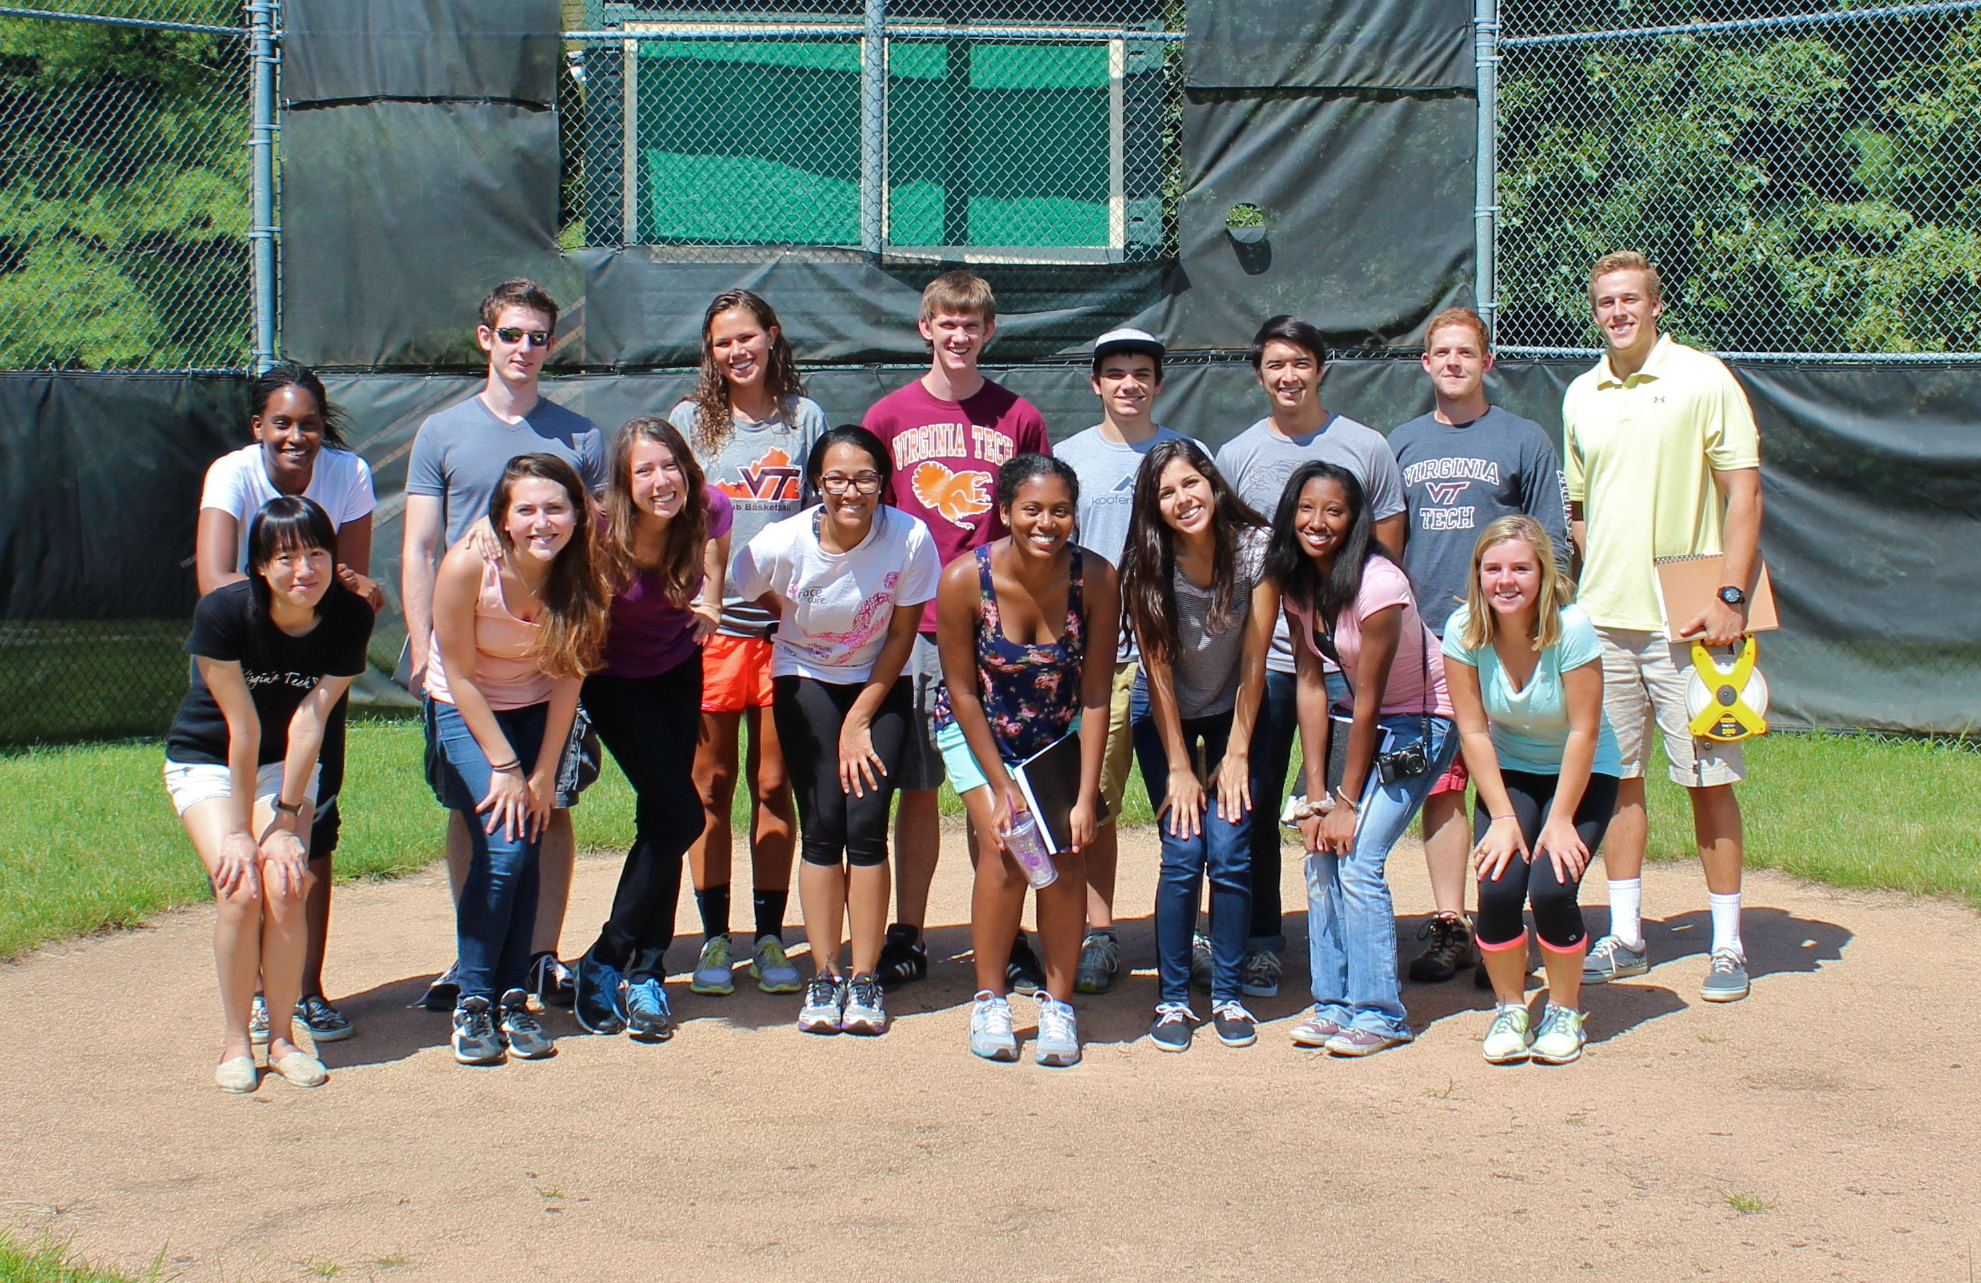 A group of 16 students stand on a baseball field.